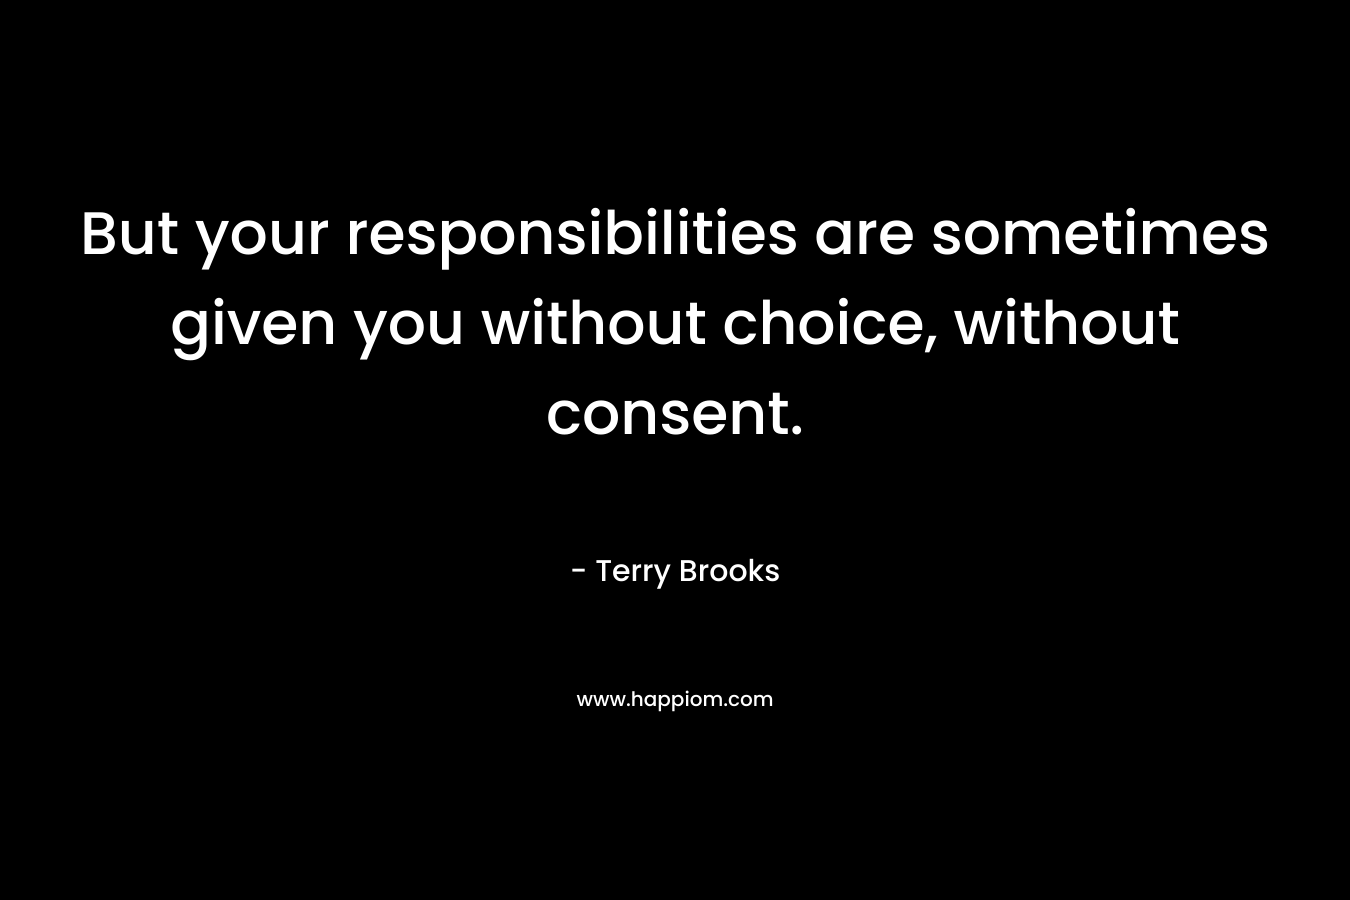 But your responsibilities are sometimes given you without choice, without consent.